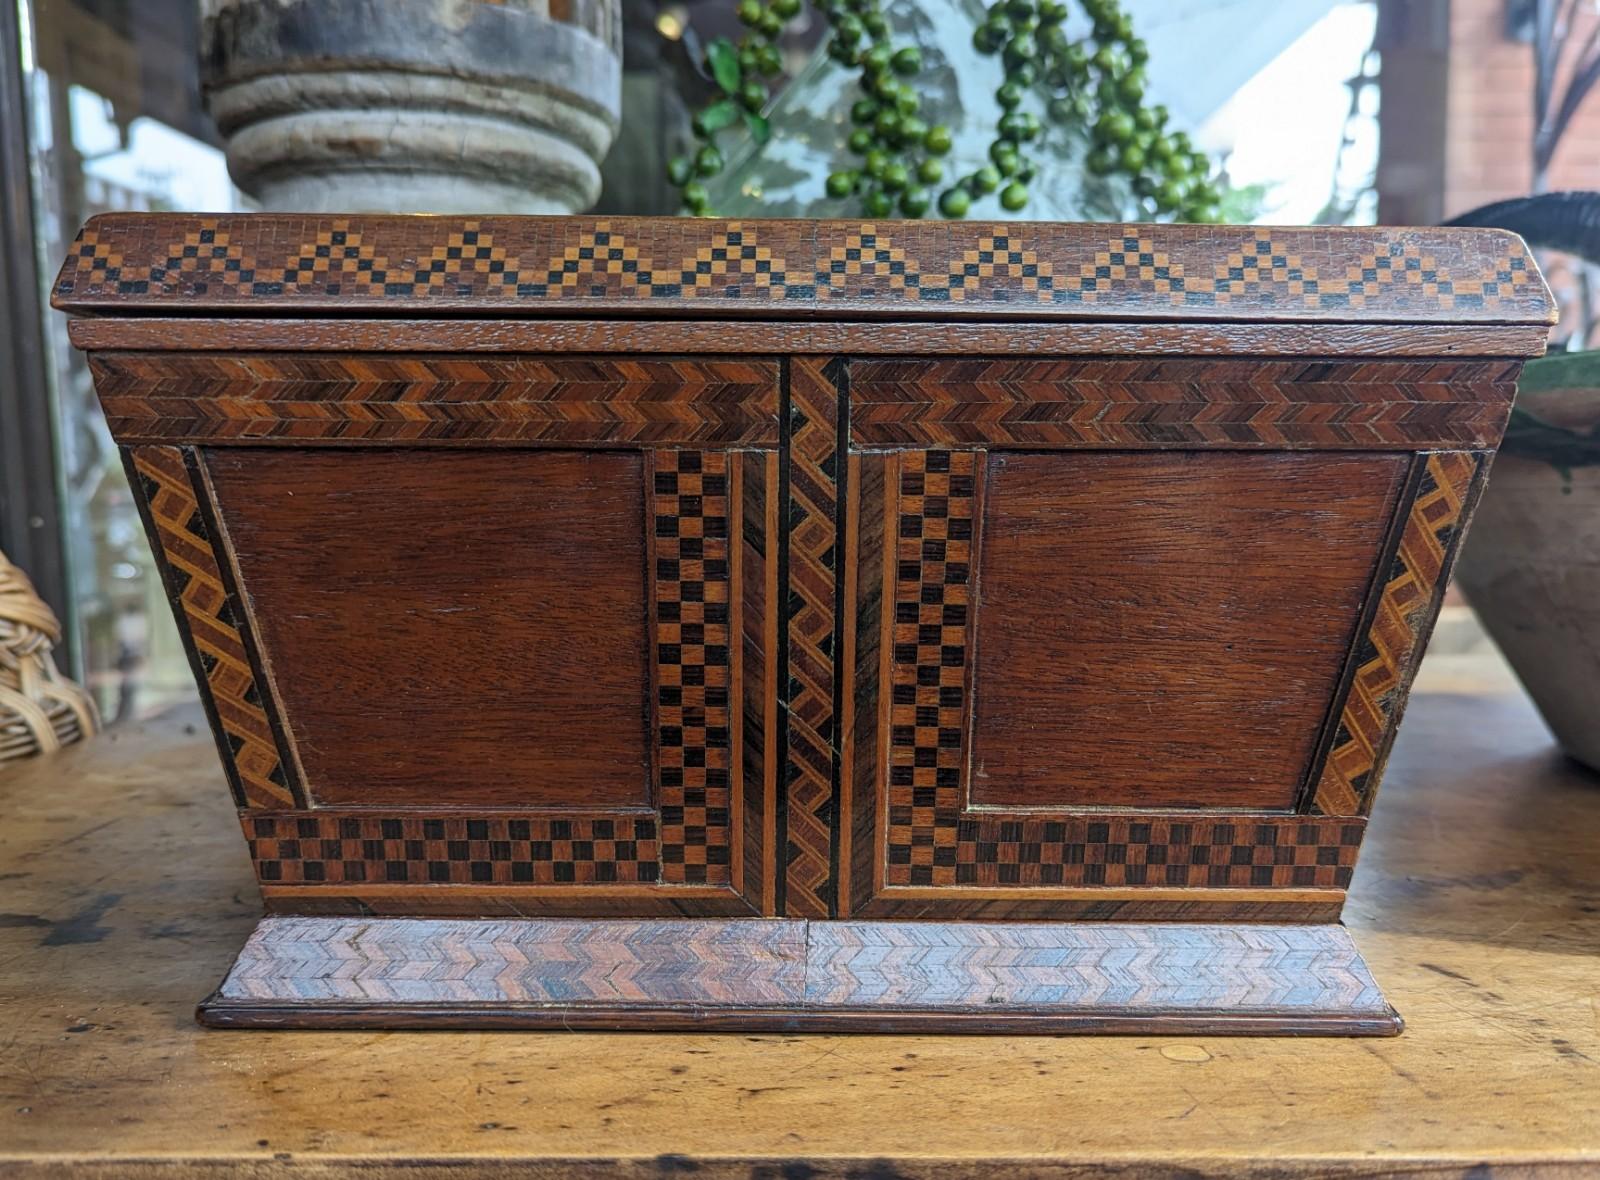 Edwardian Antique Large Wood Marquetry Inlay Box with Decorative Checkered Design For Sale